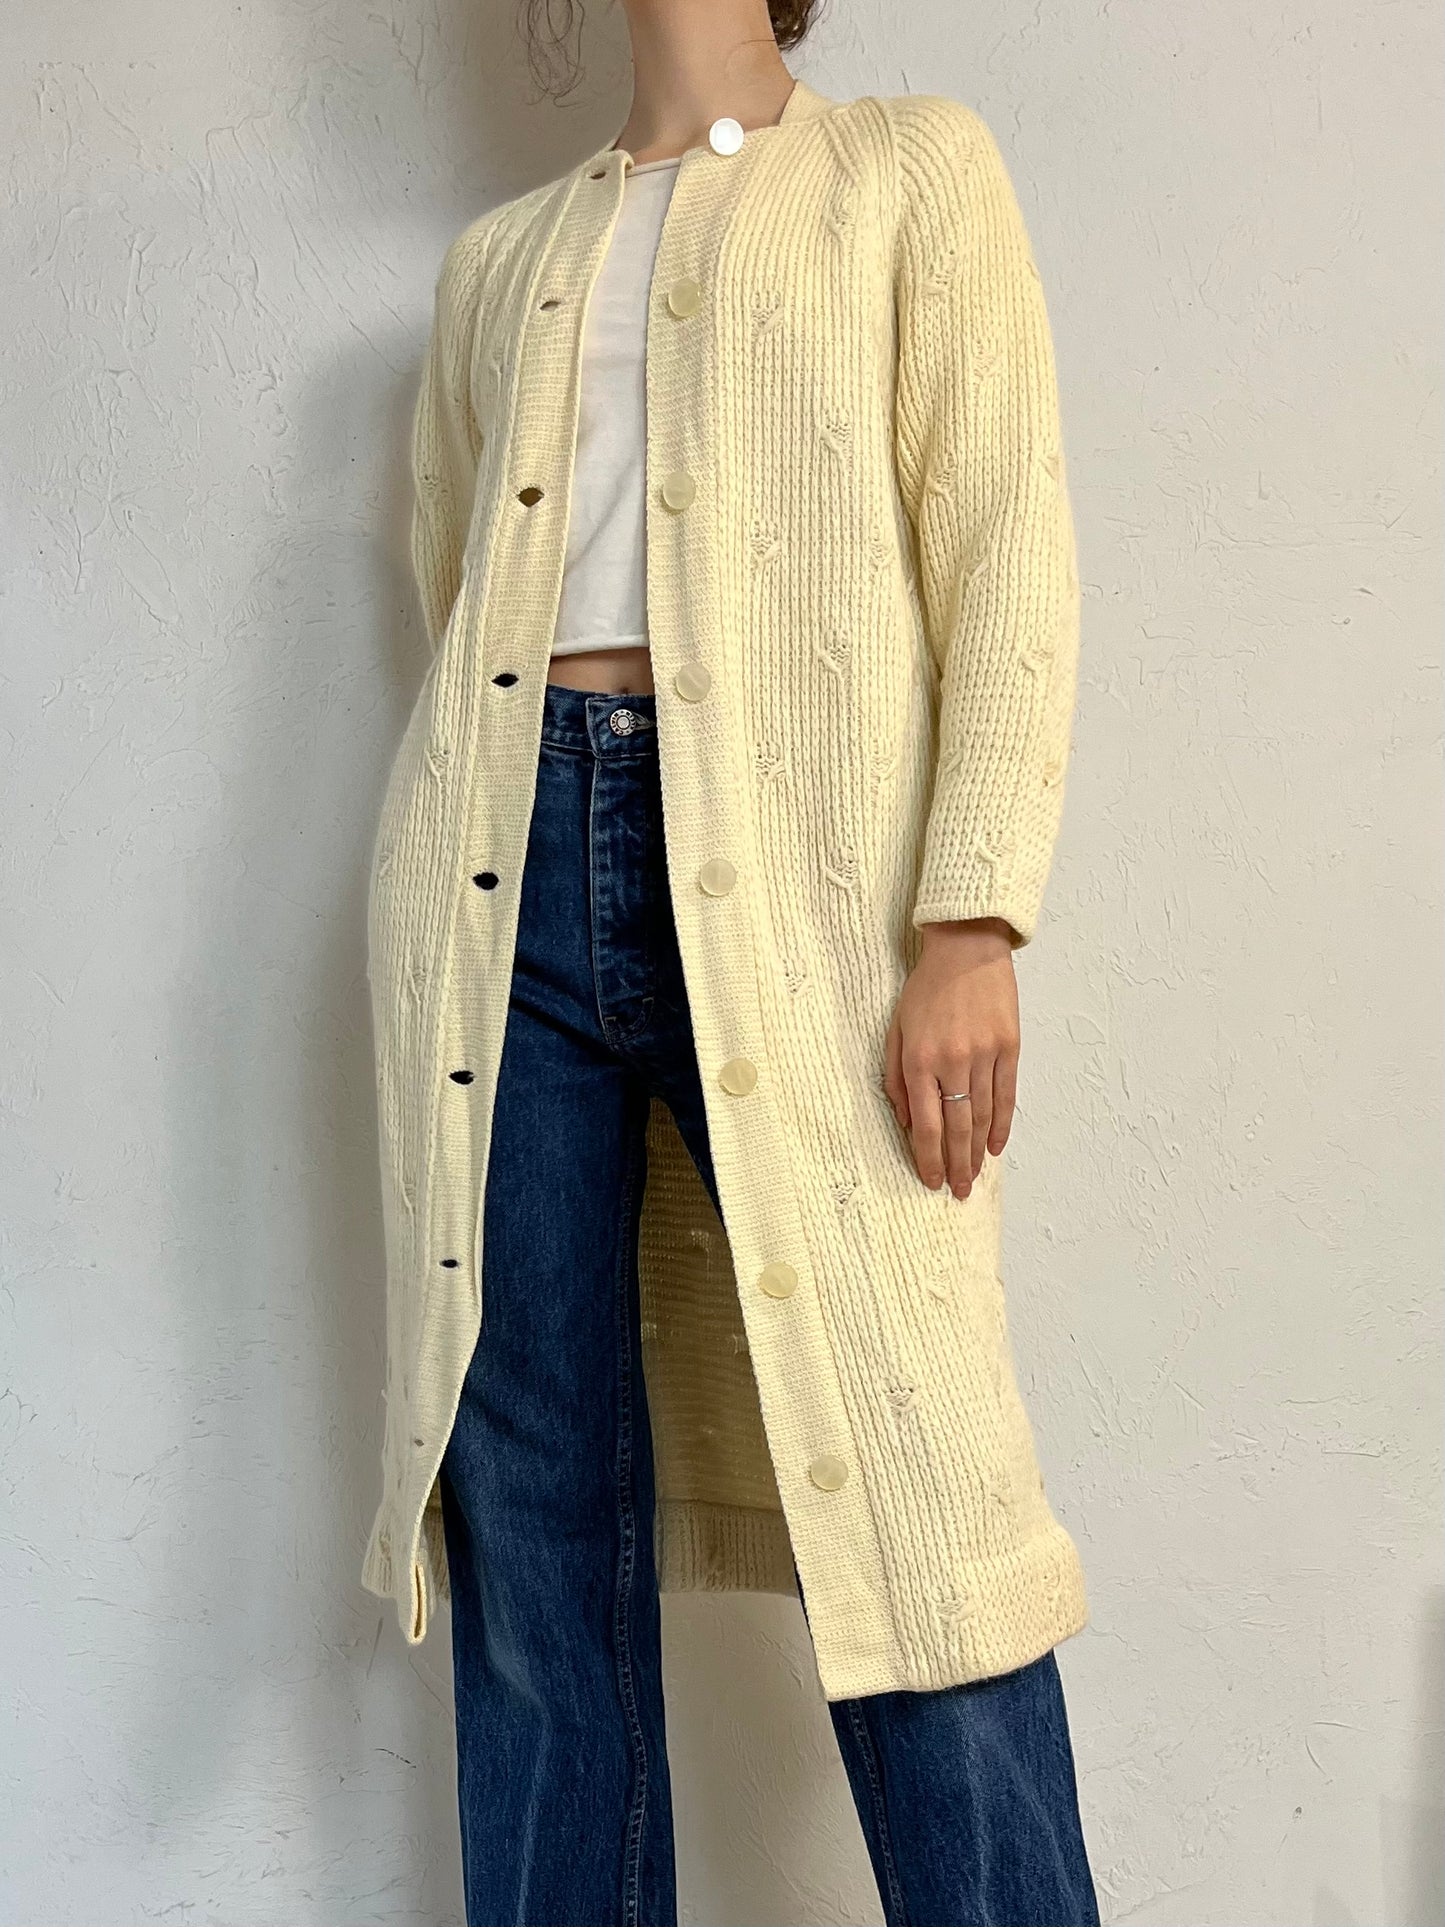 80s 'Frederick & Nelson' Cream Knit Cardigan Sweater / Small